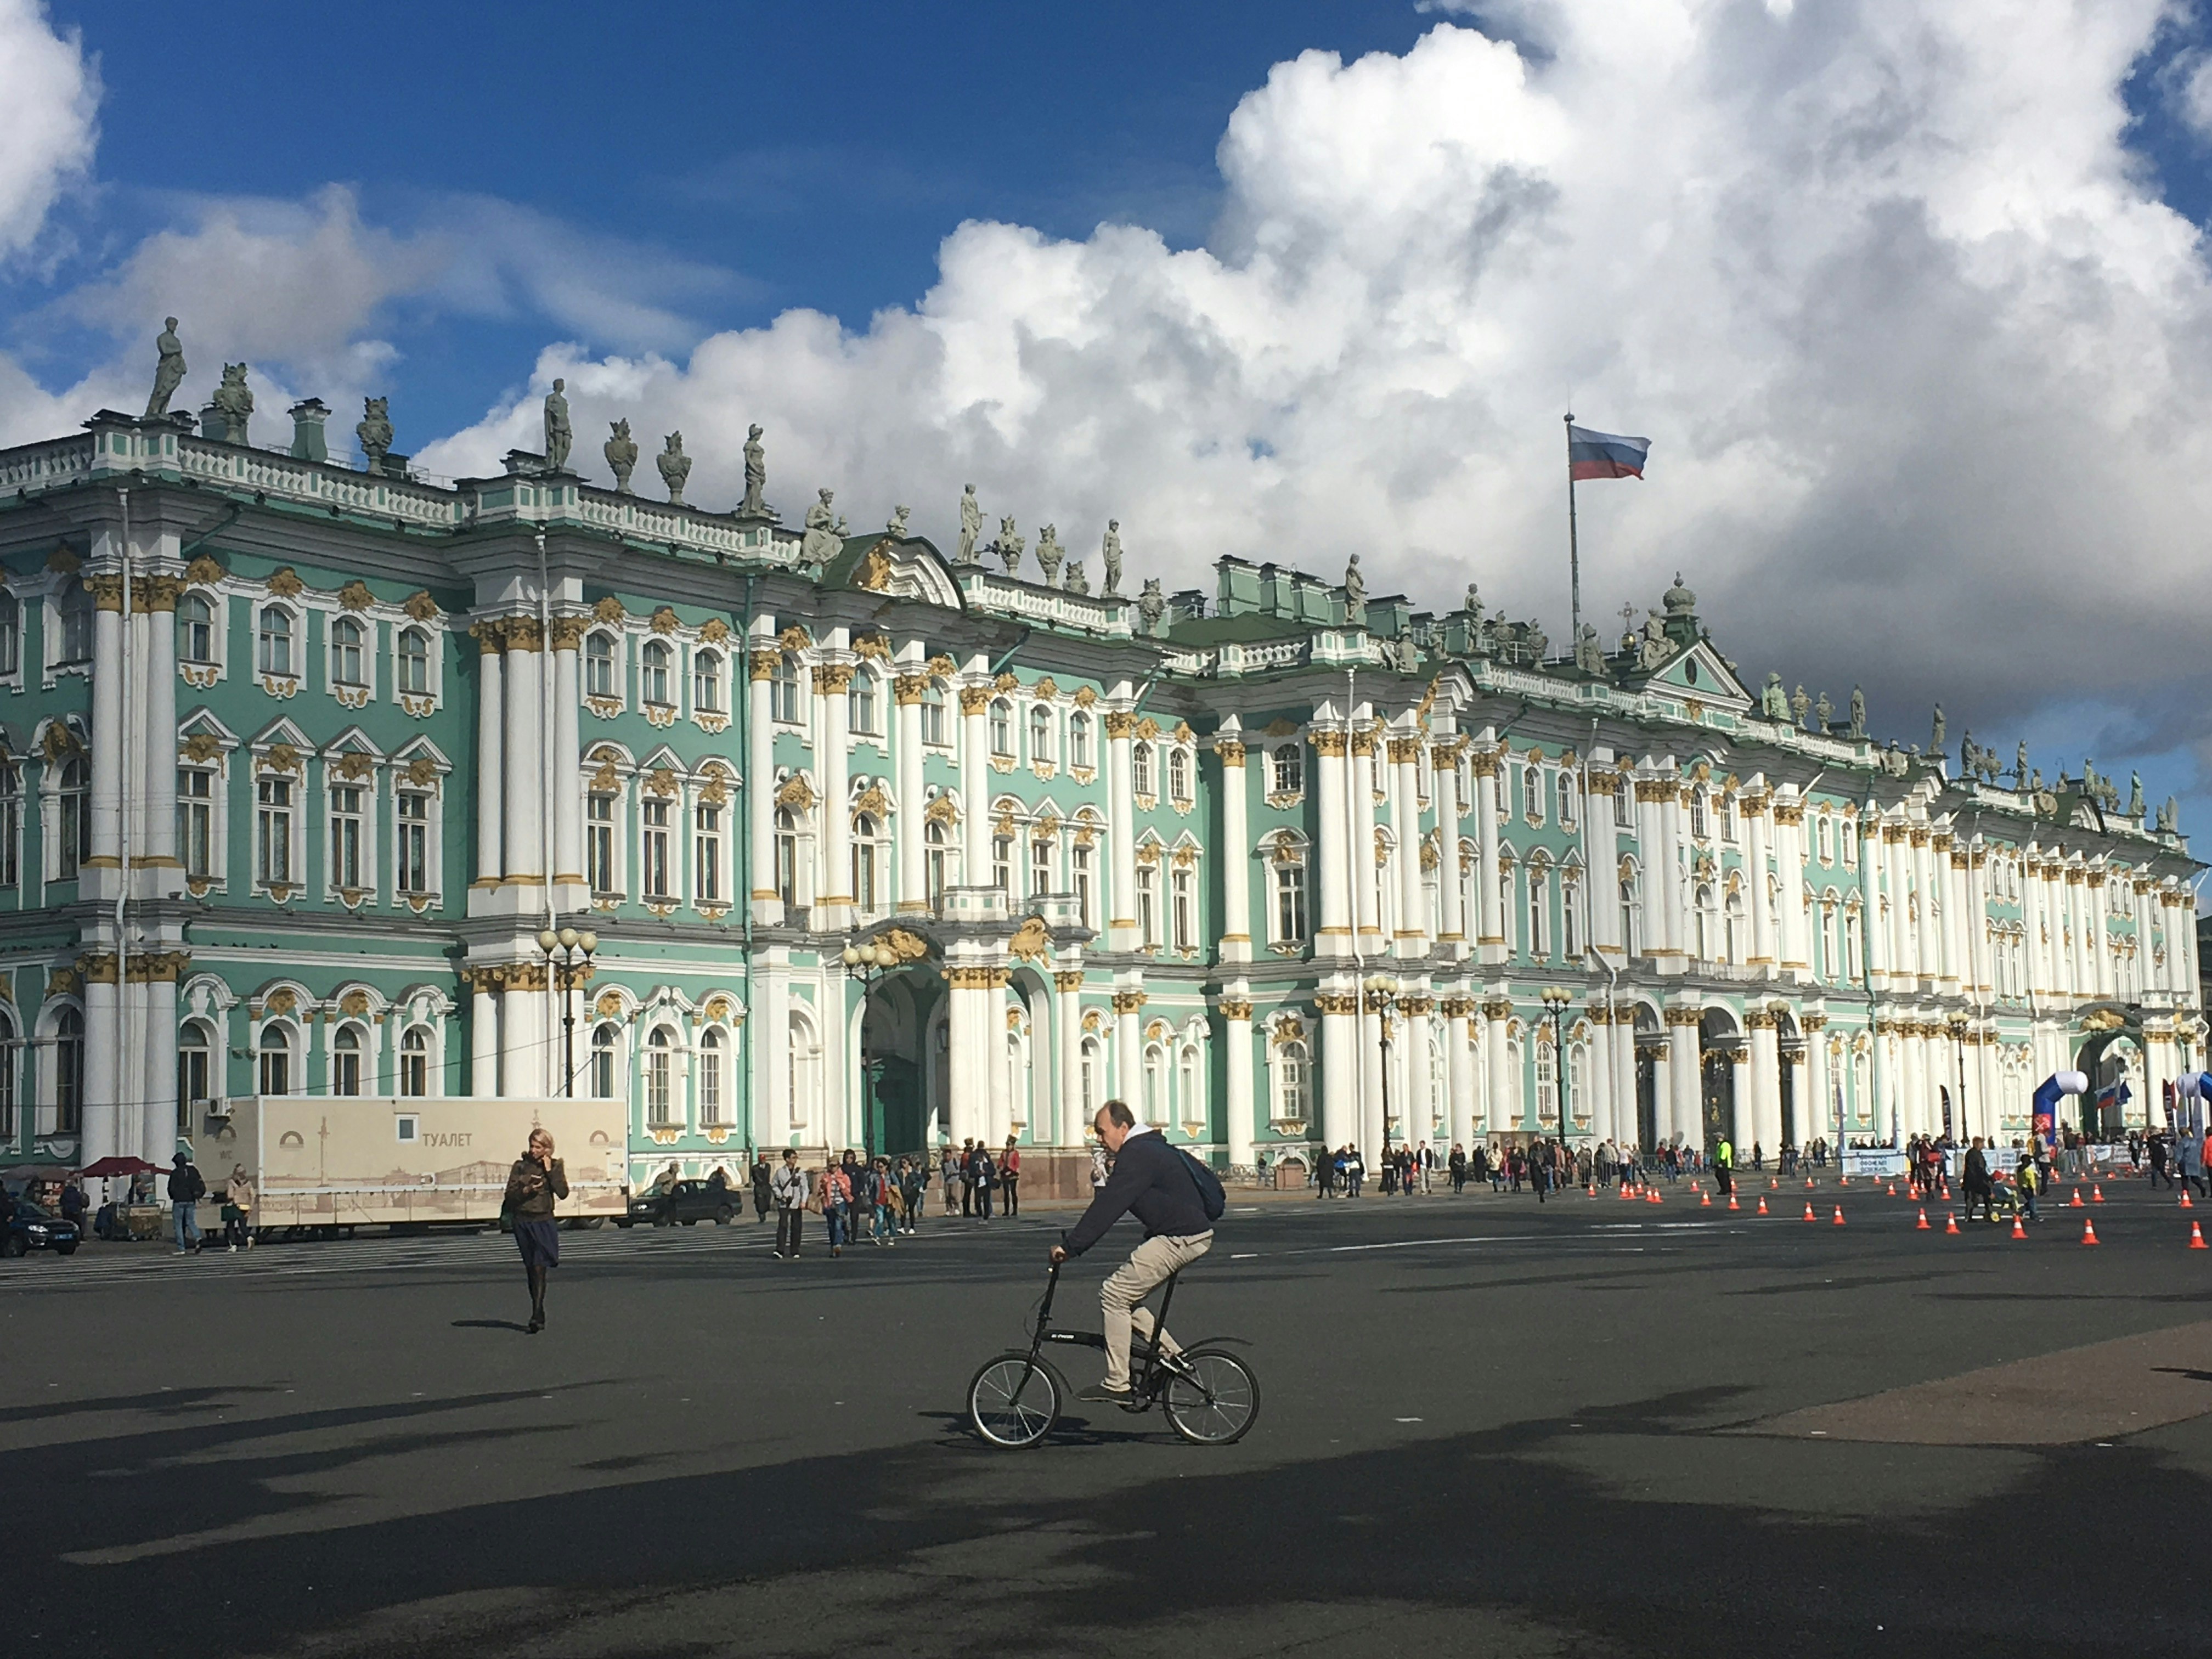 A male-presenting figure rides a bicycle outside the front of State Hermitage Museum, a regal teal green building with gold architectural embellisments.